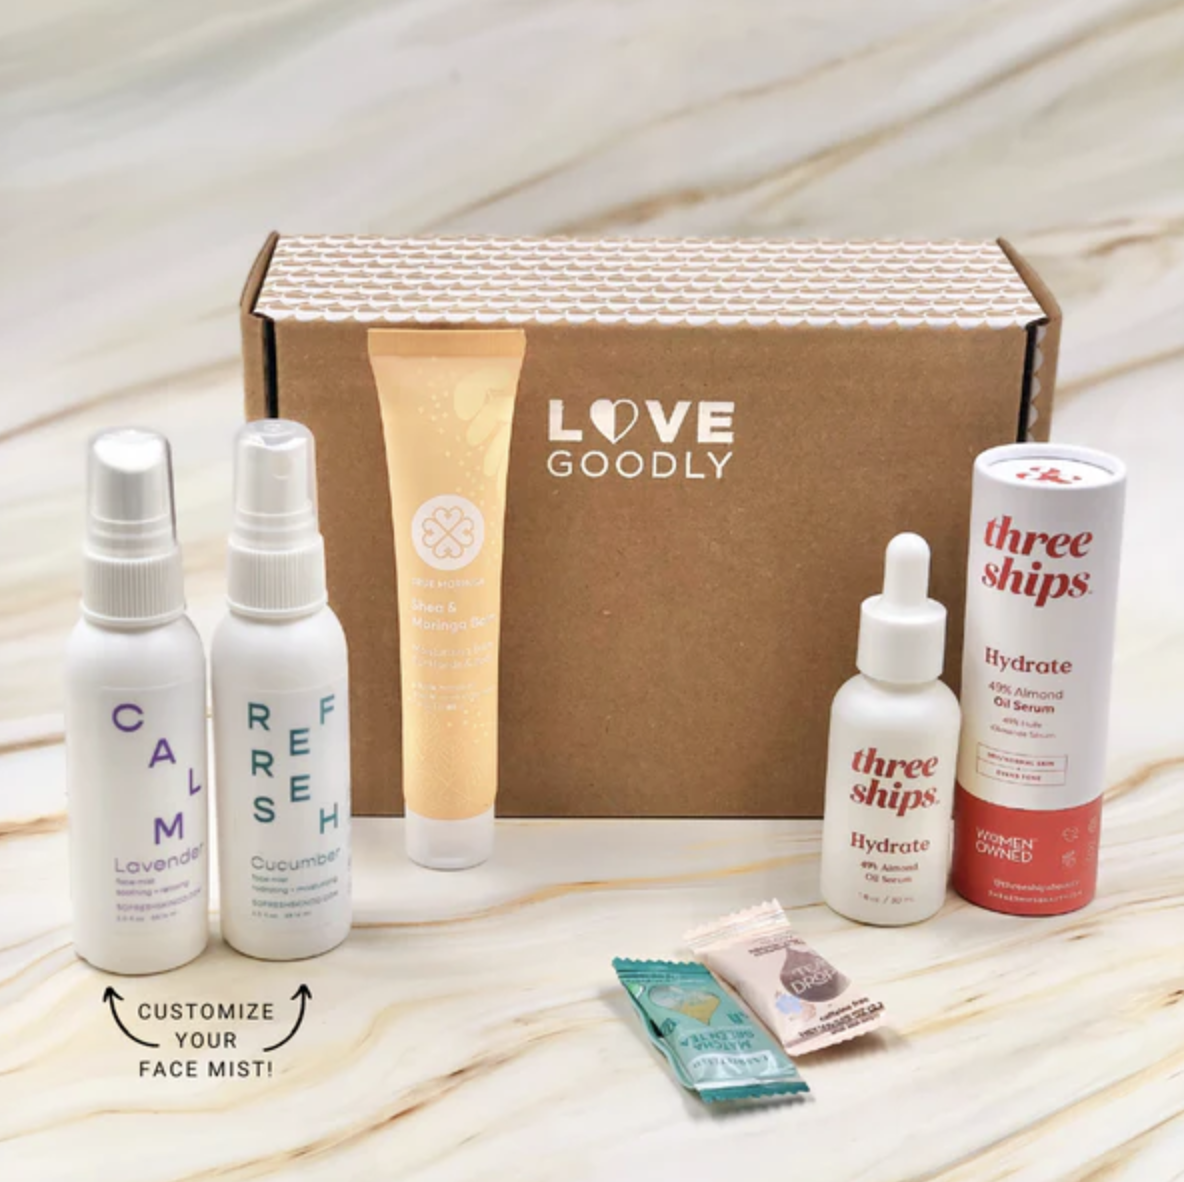 A Love Goodly box and the variety of beauty, skincare, and wellness products that come inside